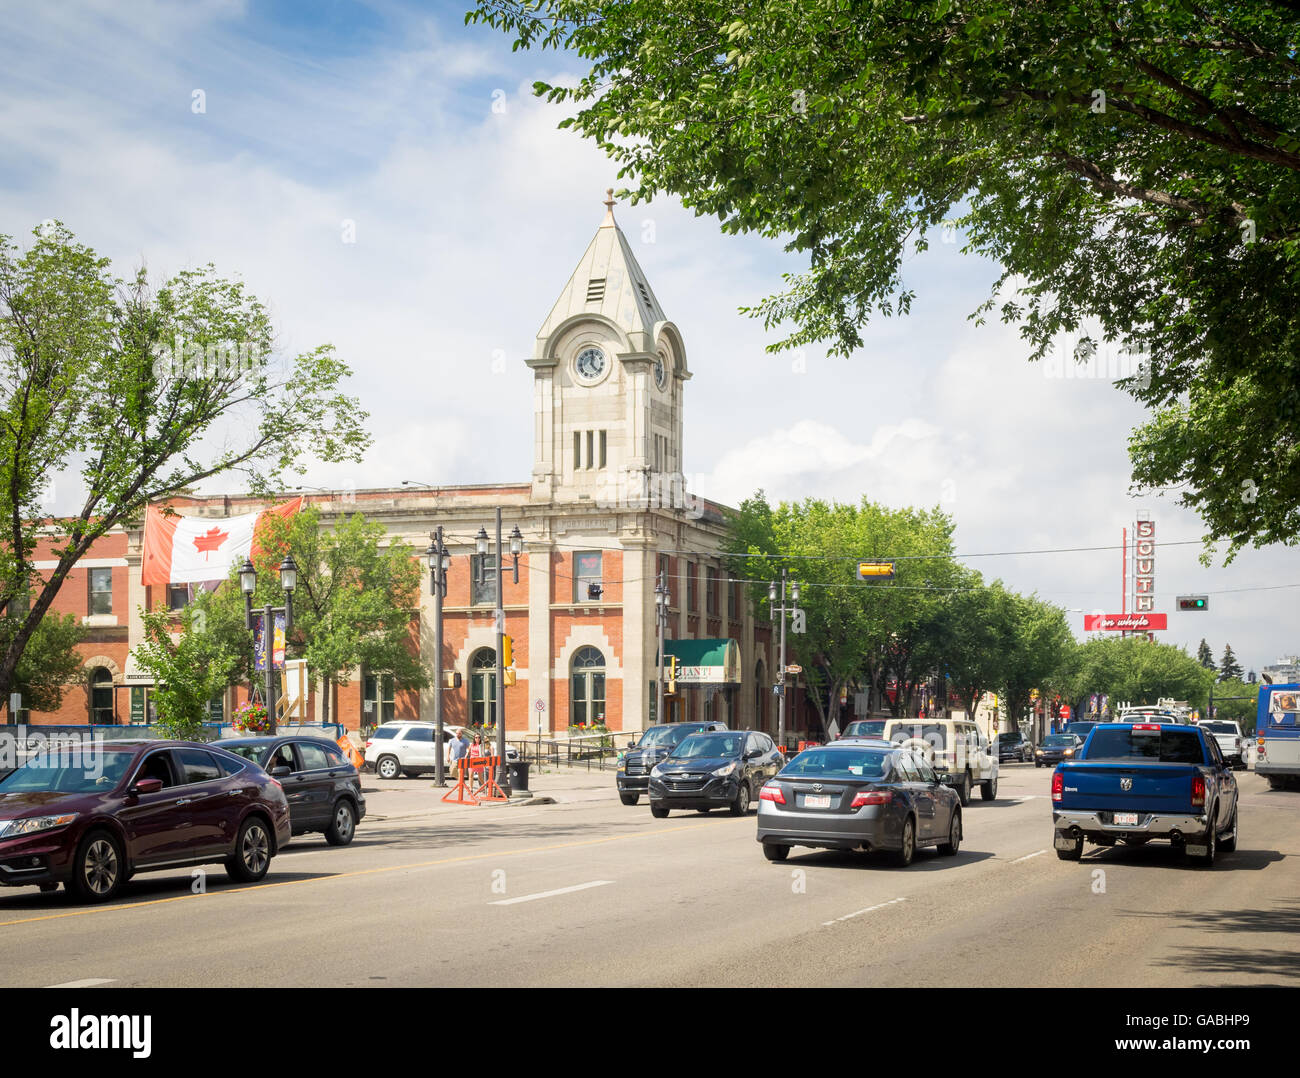 A view of the Old Strathcona Post Office and Whyte Avenue (82 Avenue) in Edmonton, Alberta, Canada. Stock Photo